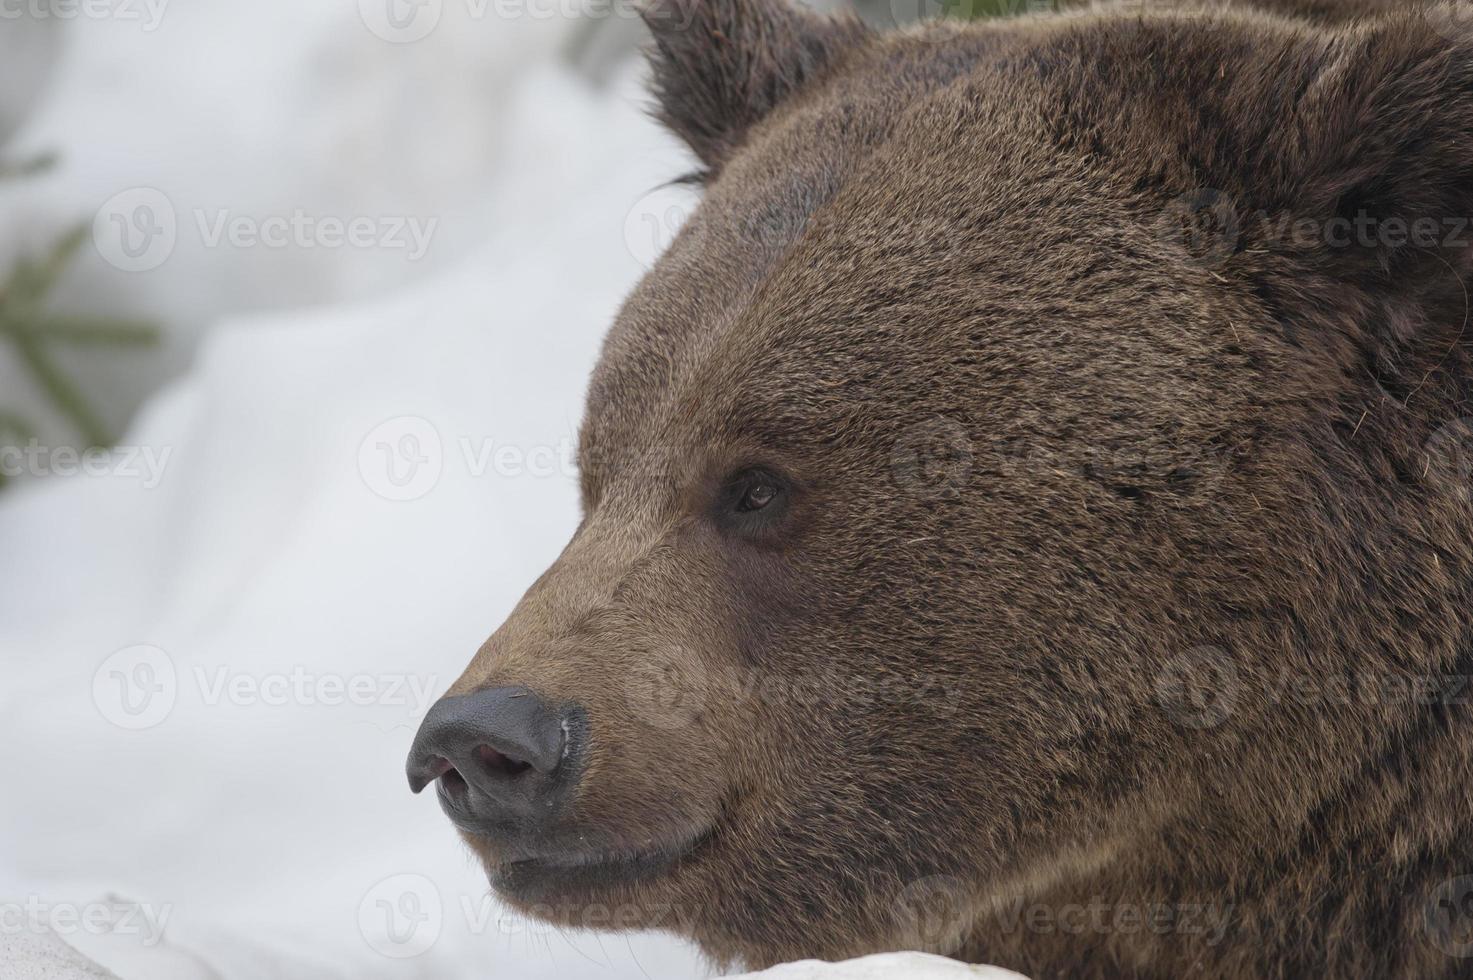 A black bear brown grizzly in the snow background photo